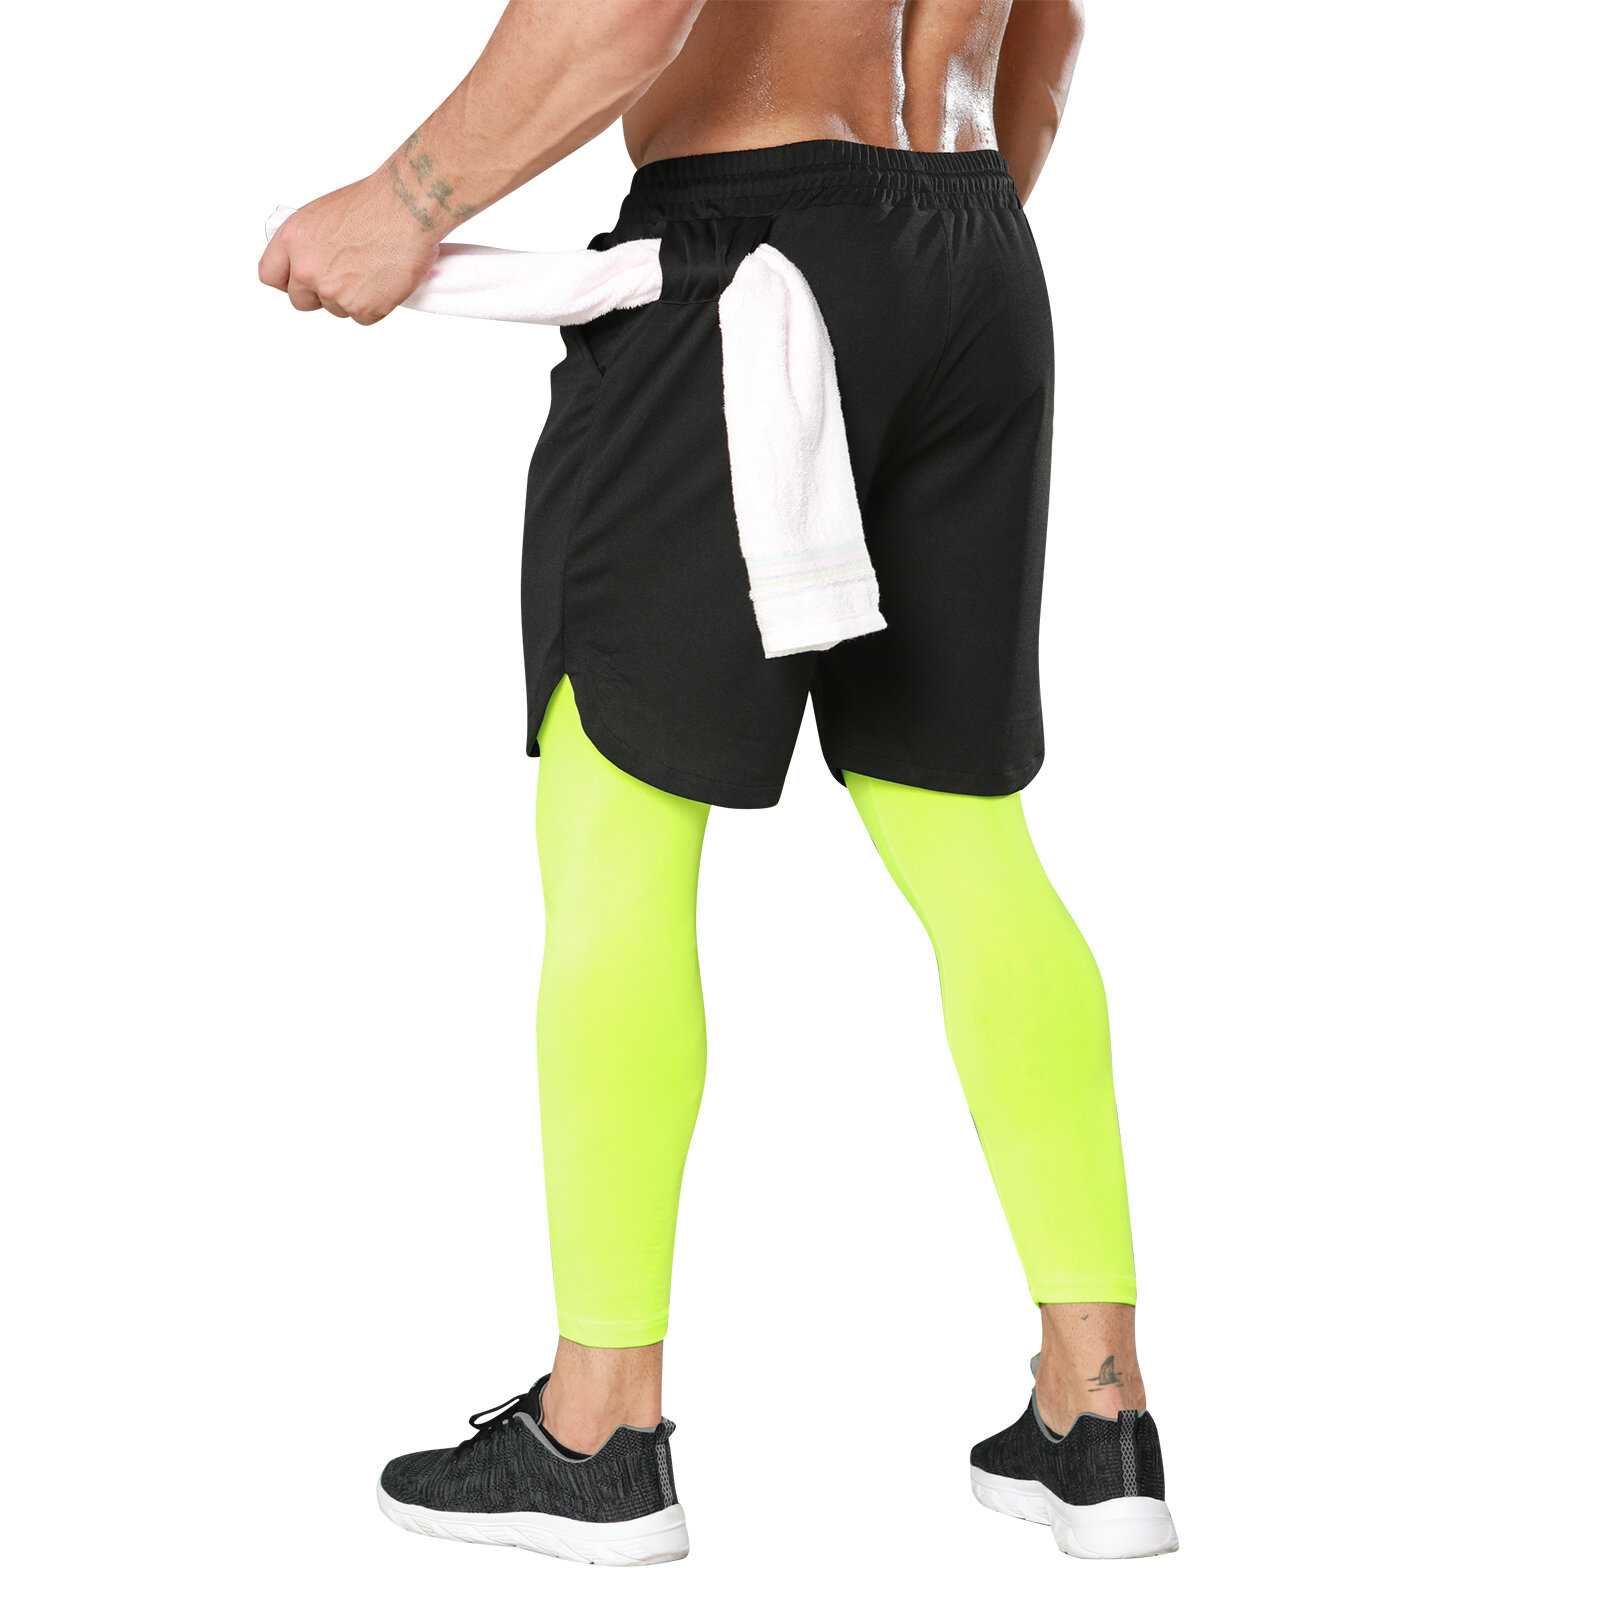 Buy BEESCLOVER 2 in 1 Sports Mens Basketball Shorts Running Tights